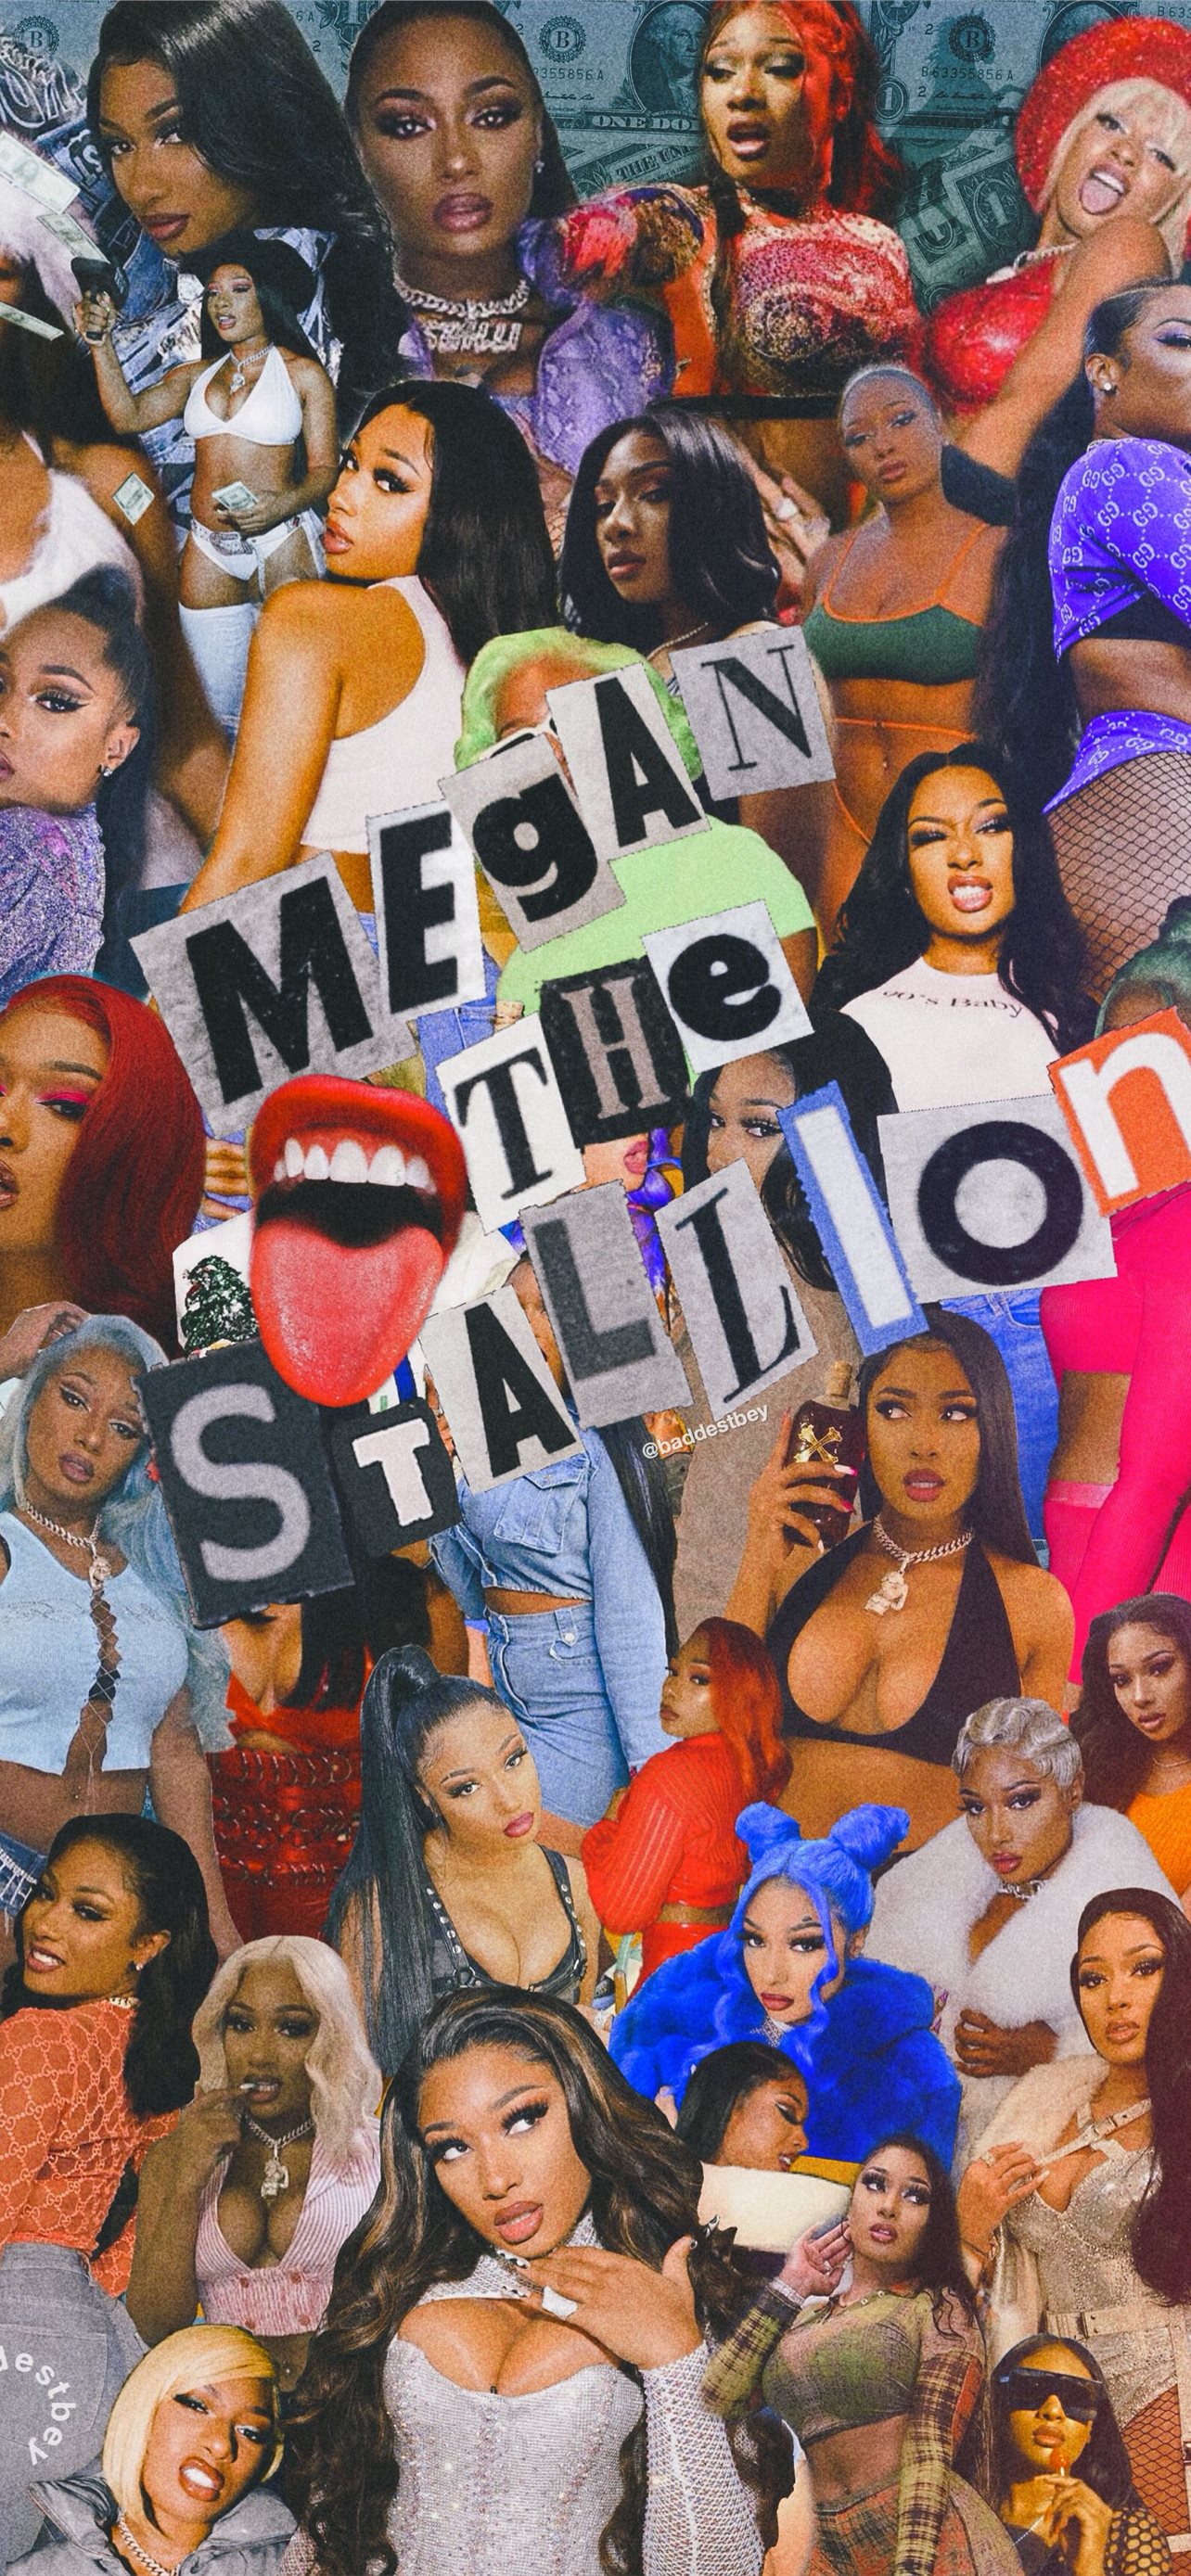 A collage of Megan Thee Stallion and other women in the music industry. - 90s